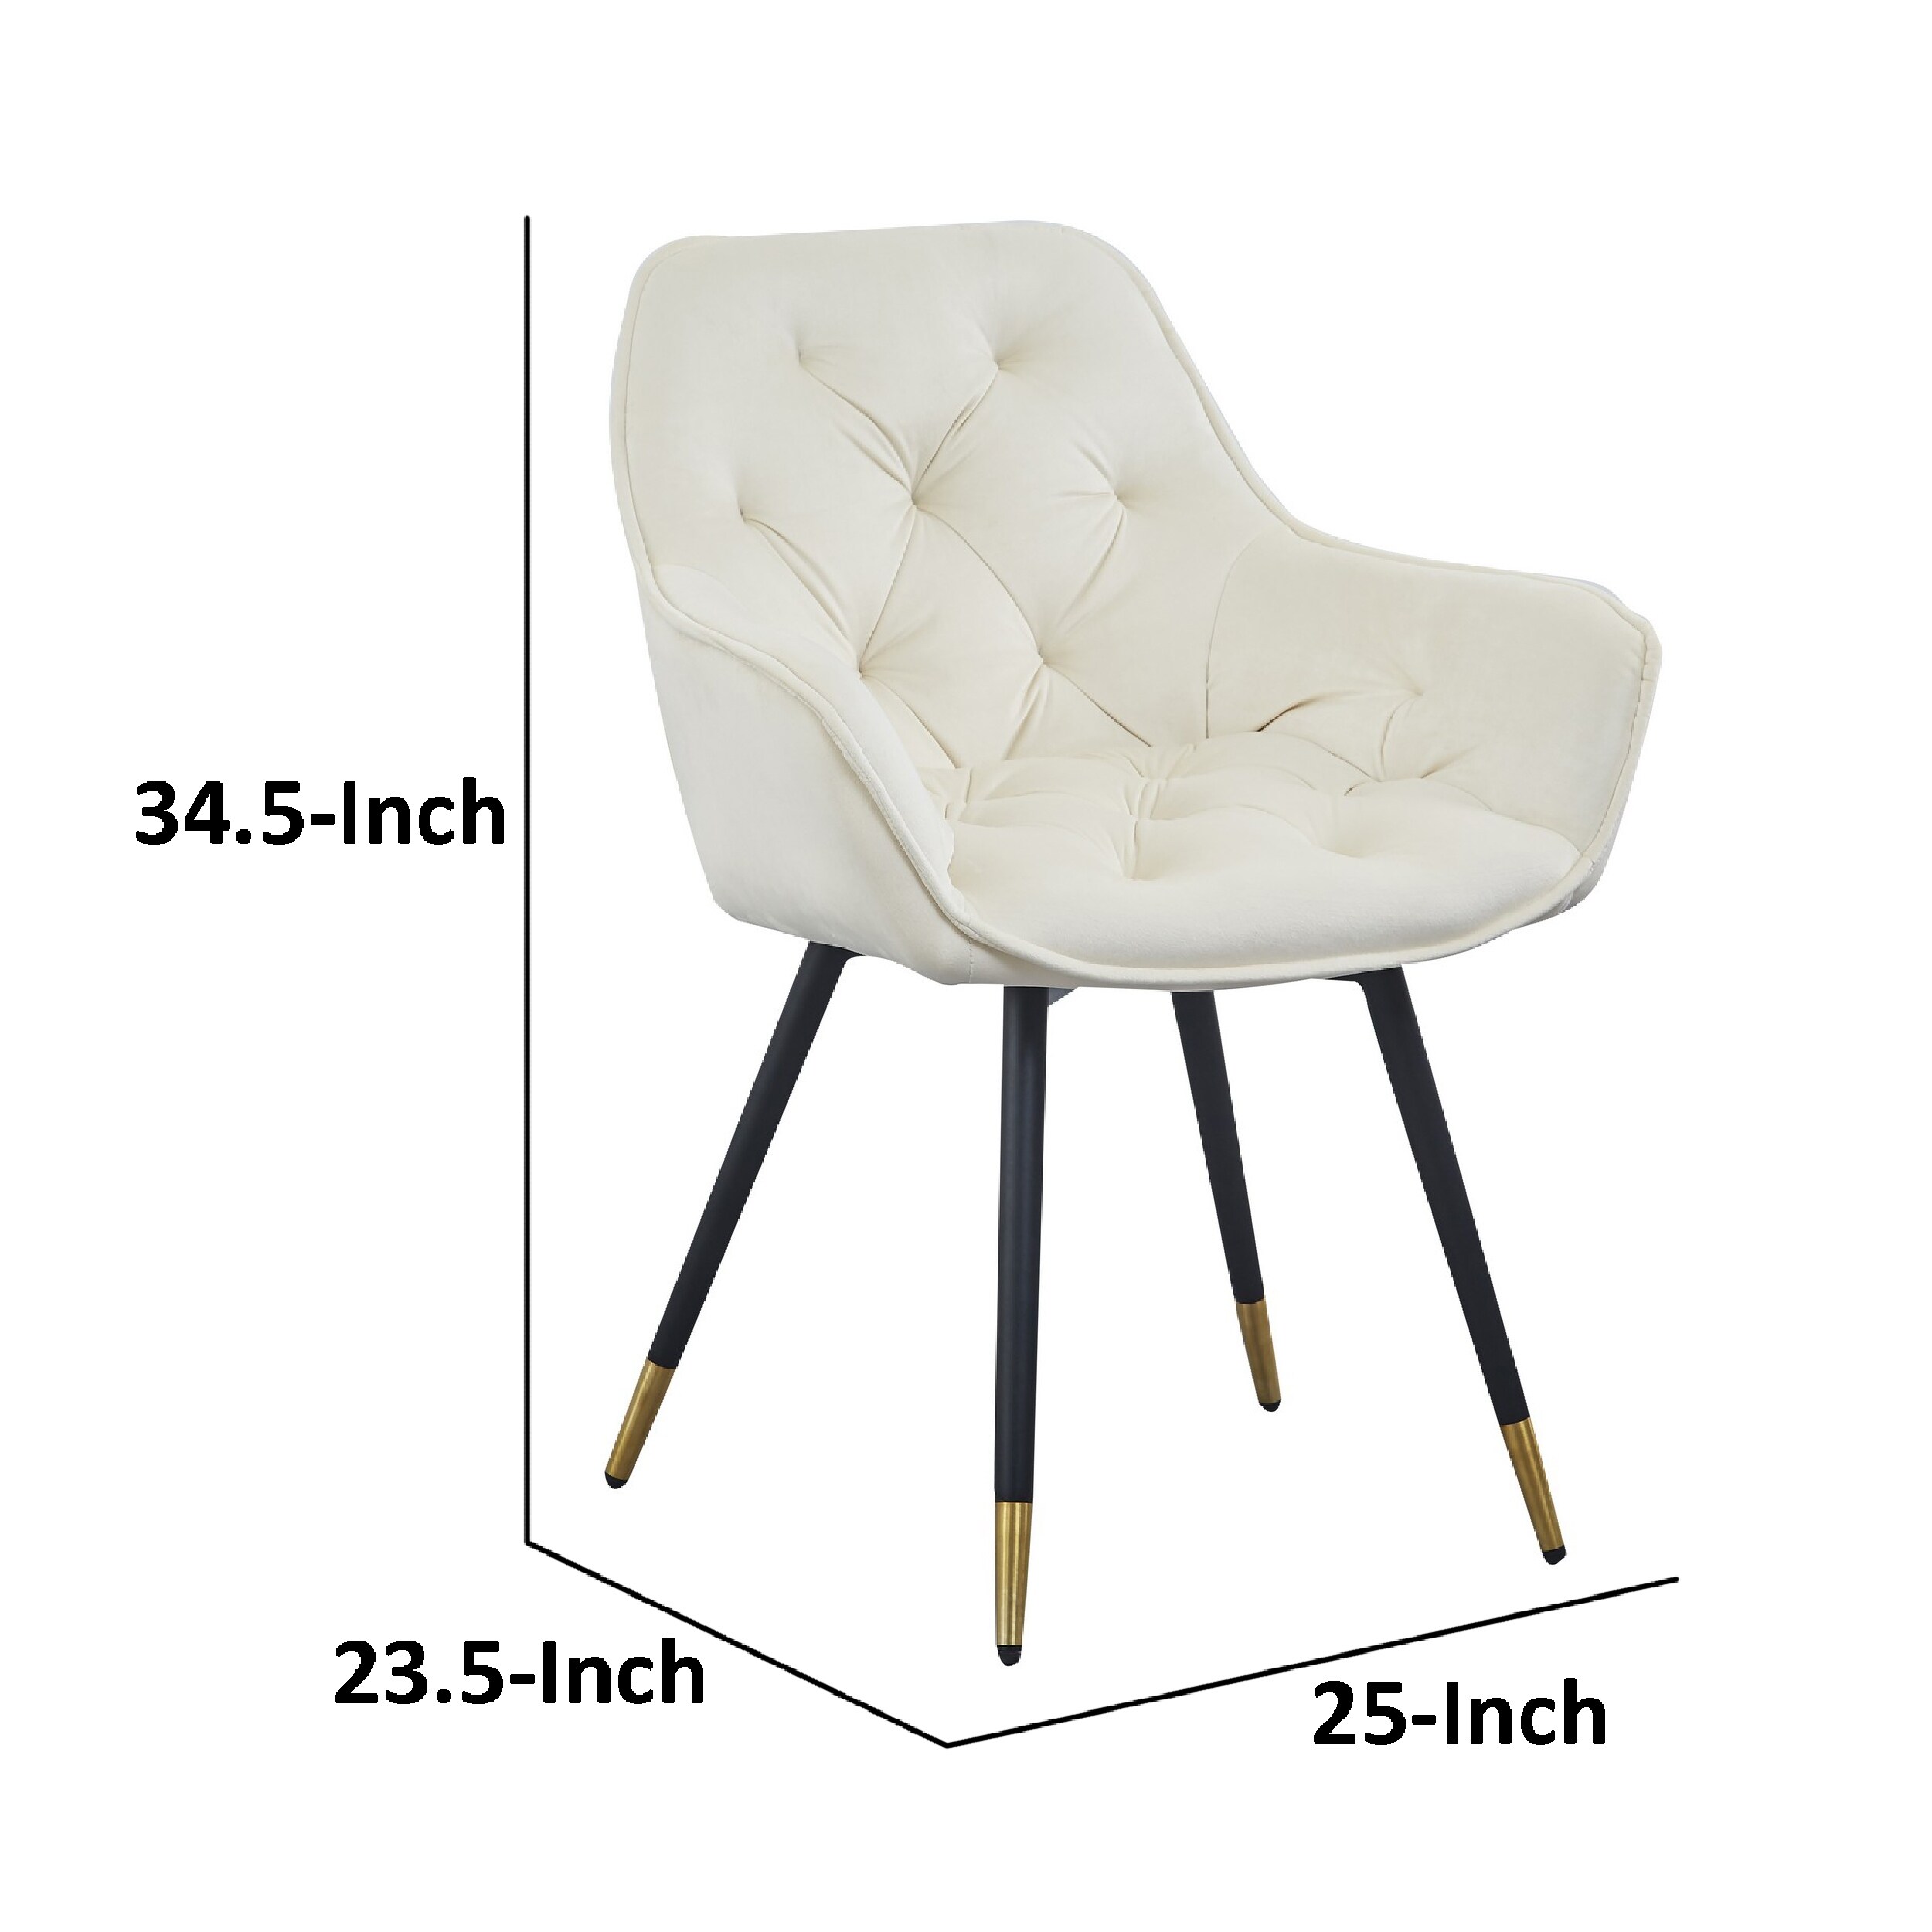 Alix 25 Inch Modern Dining Chair, Button Tufted, Set of 2, White, Black